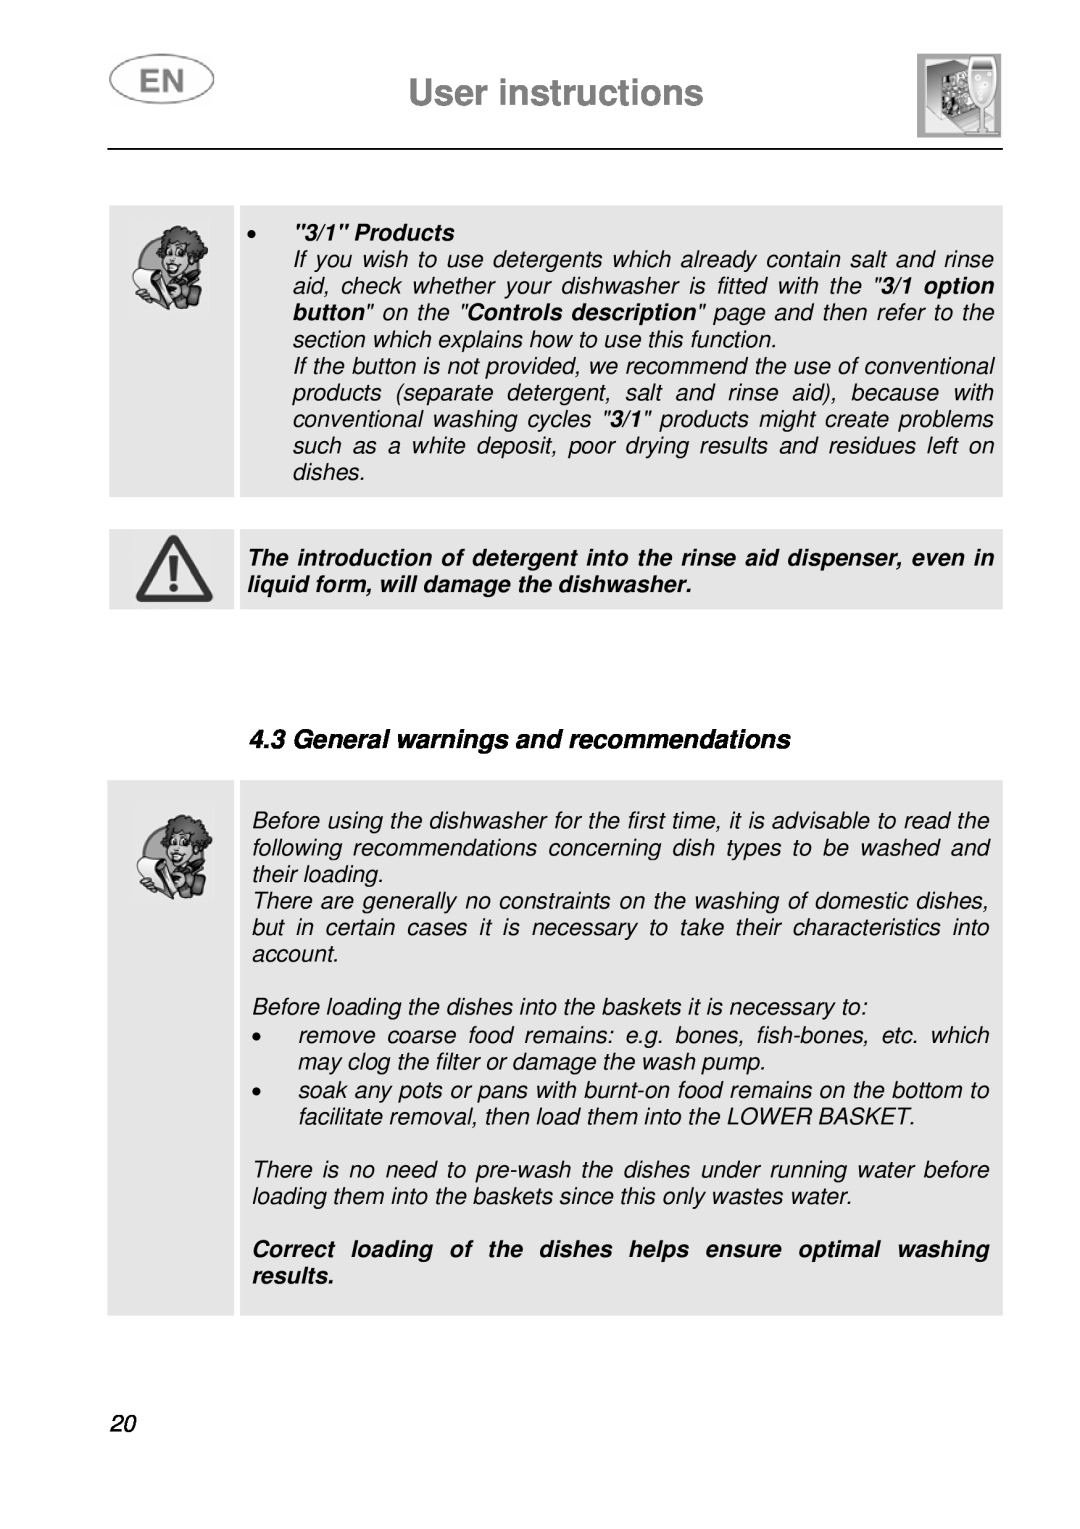 Smeg STA6246, STA6245 instruction manual User instructions, General warnings and recommendations, 3/1 Products 